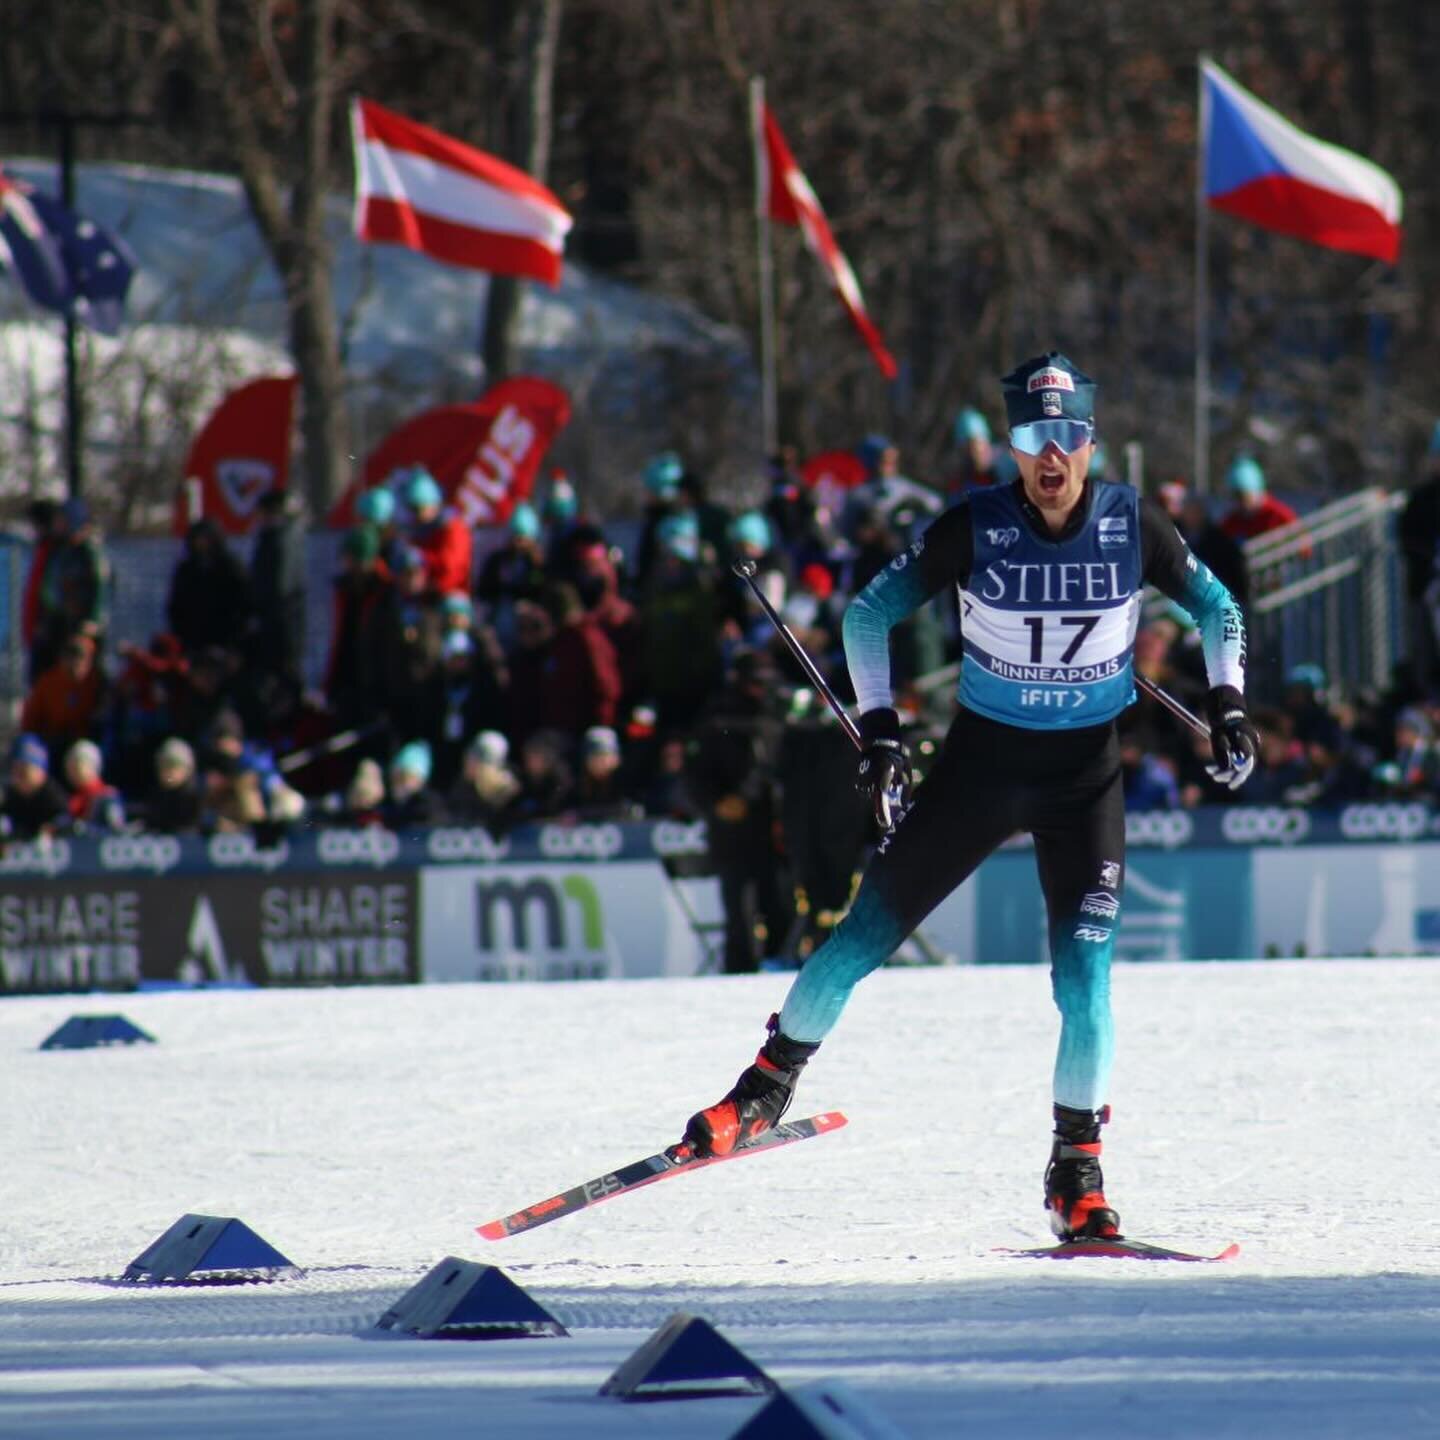 MSP World Cup 🇺🇸

Turns out people do care about nordic skiing 💥🎉

Pic: @adventure_engel